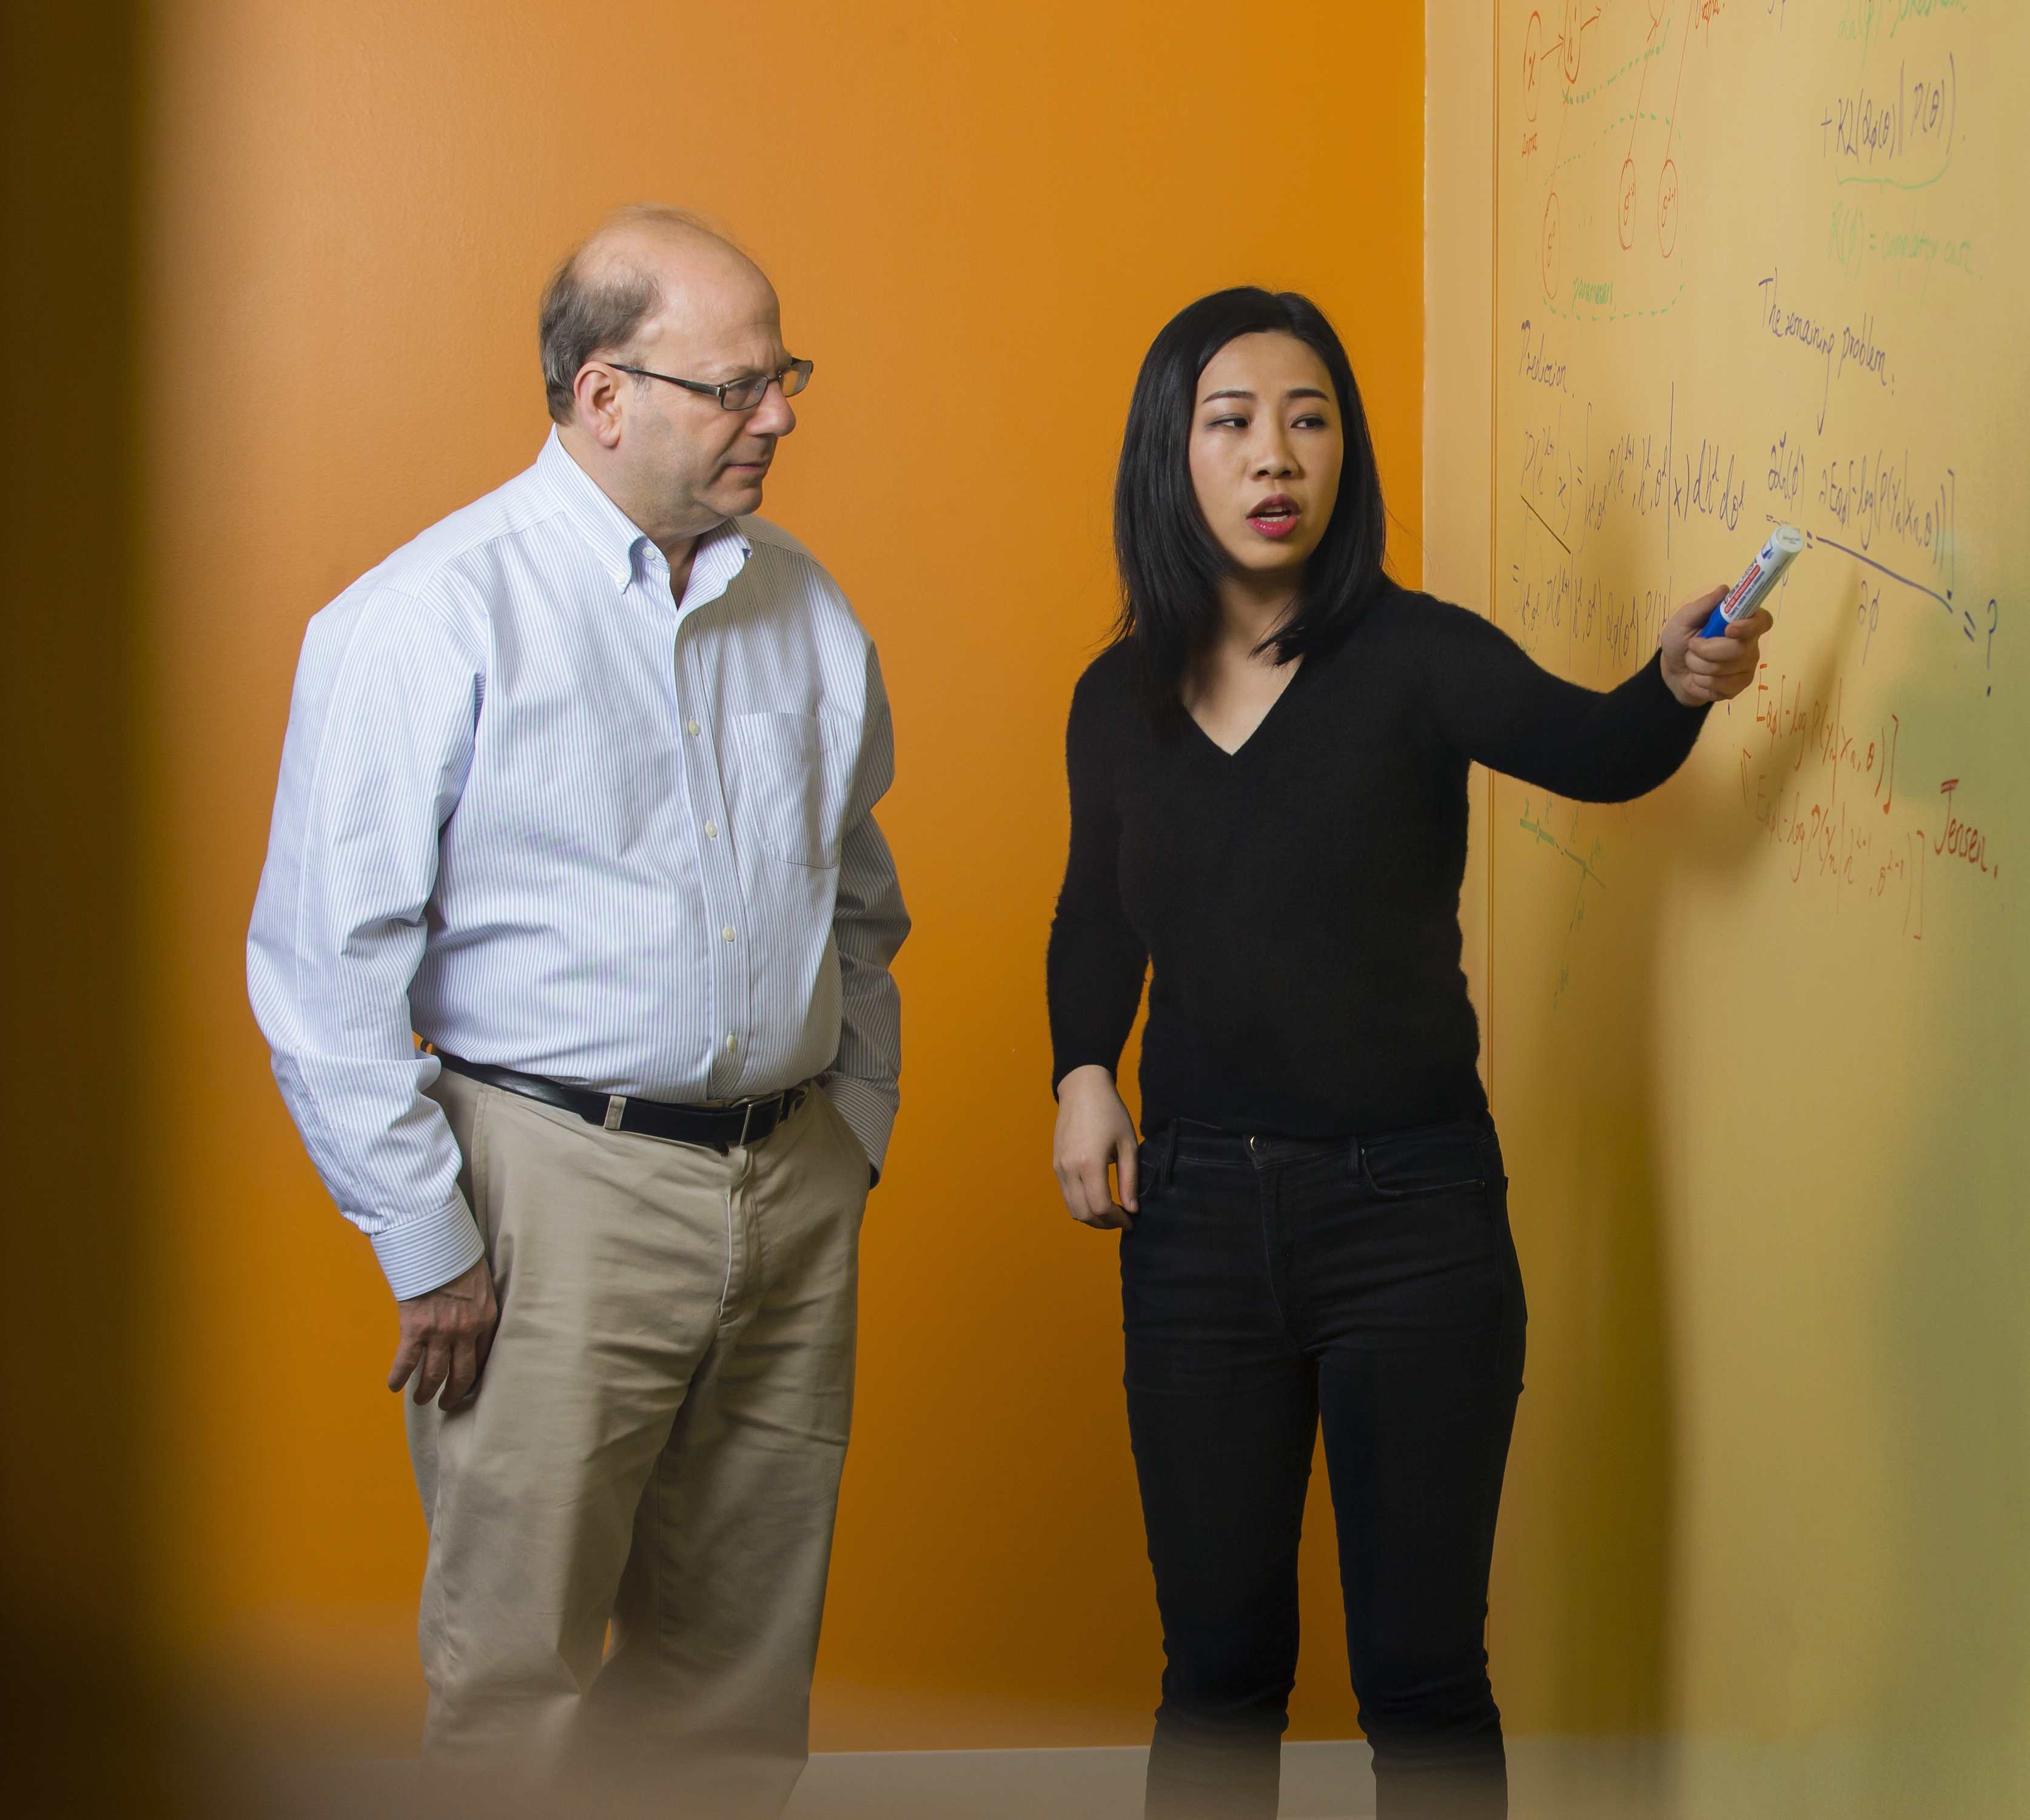 University of Maryland computer science faculty members David Jacobs (left) and Furong Huang (right) are part of the new Center for Machine Learning. Jacobs is an expert in computer vision and is the center’s interim director; Huang is conducting research in neural networks. Photo: John T. Consoli. Click image to download hi-res version.